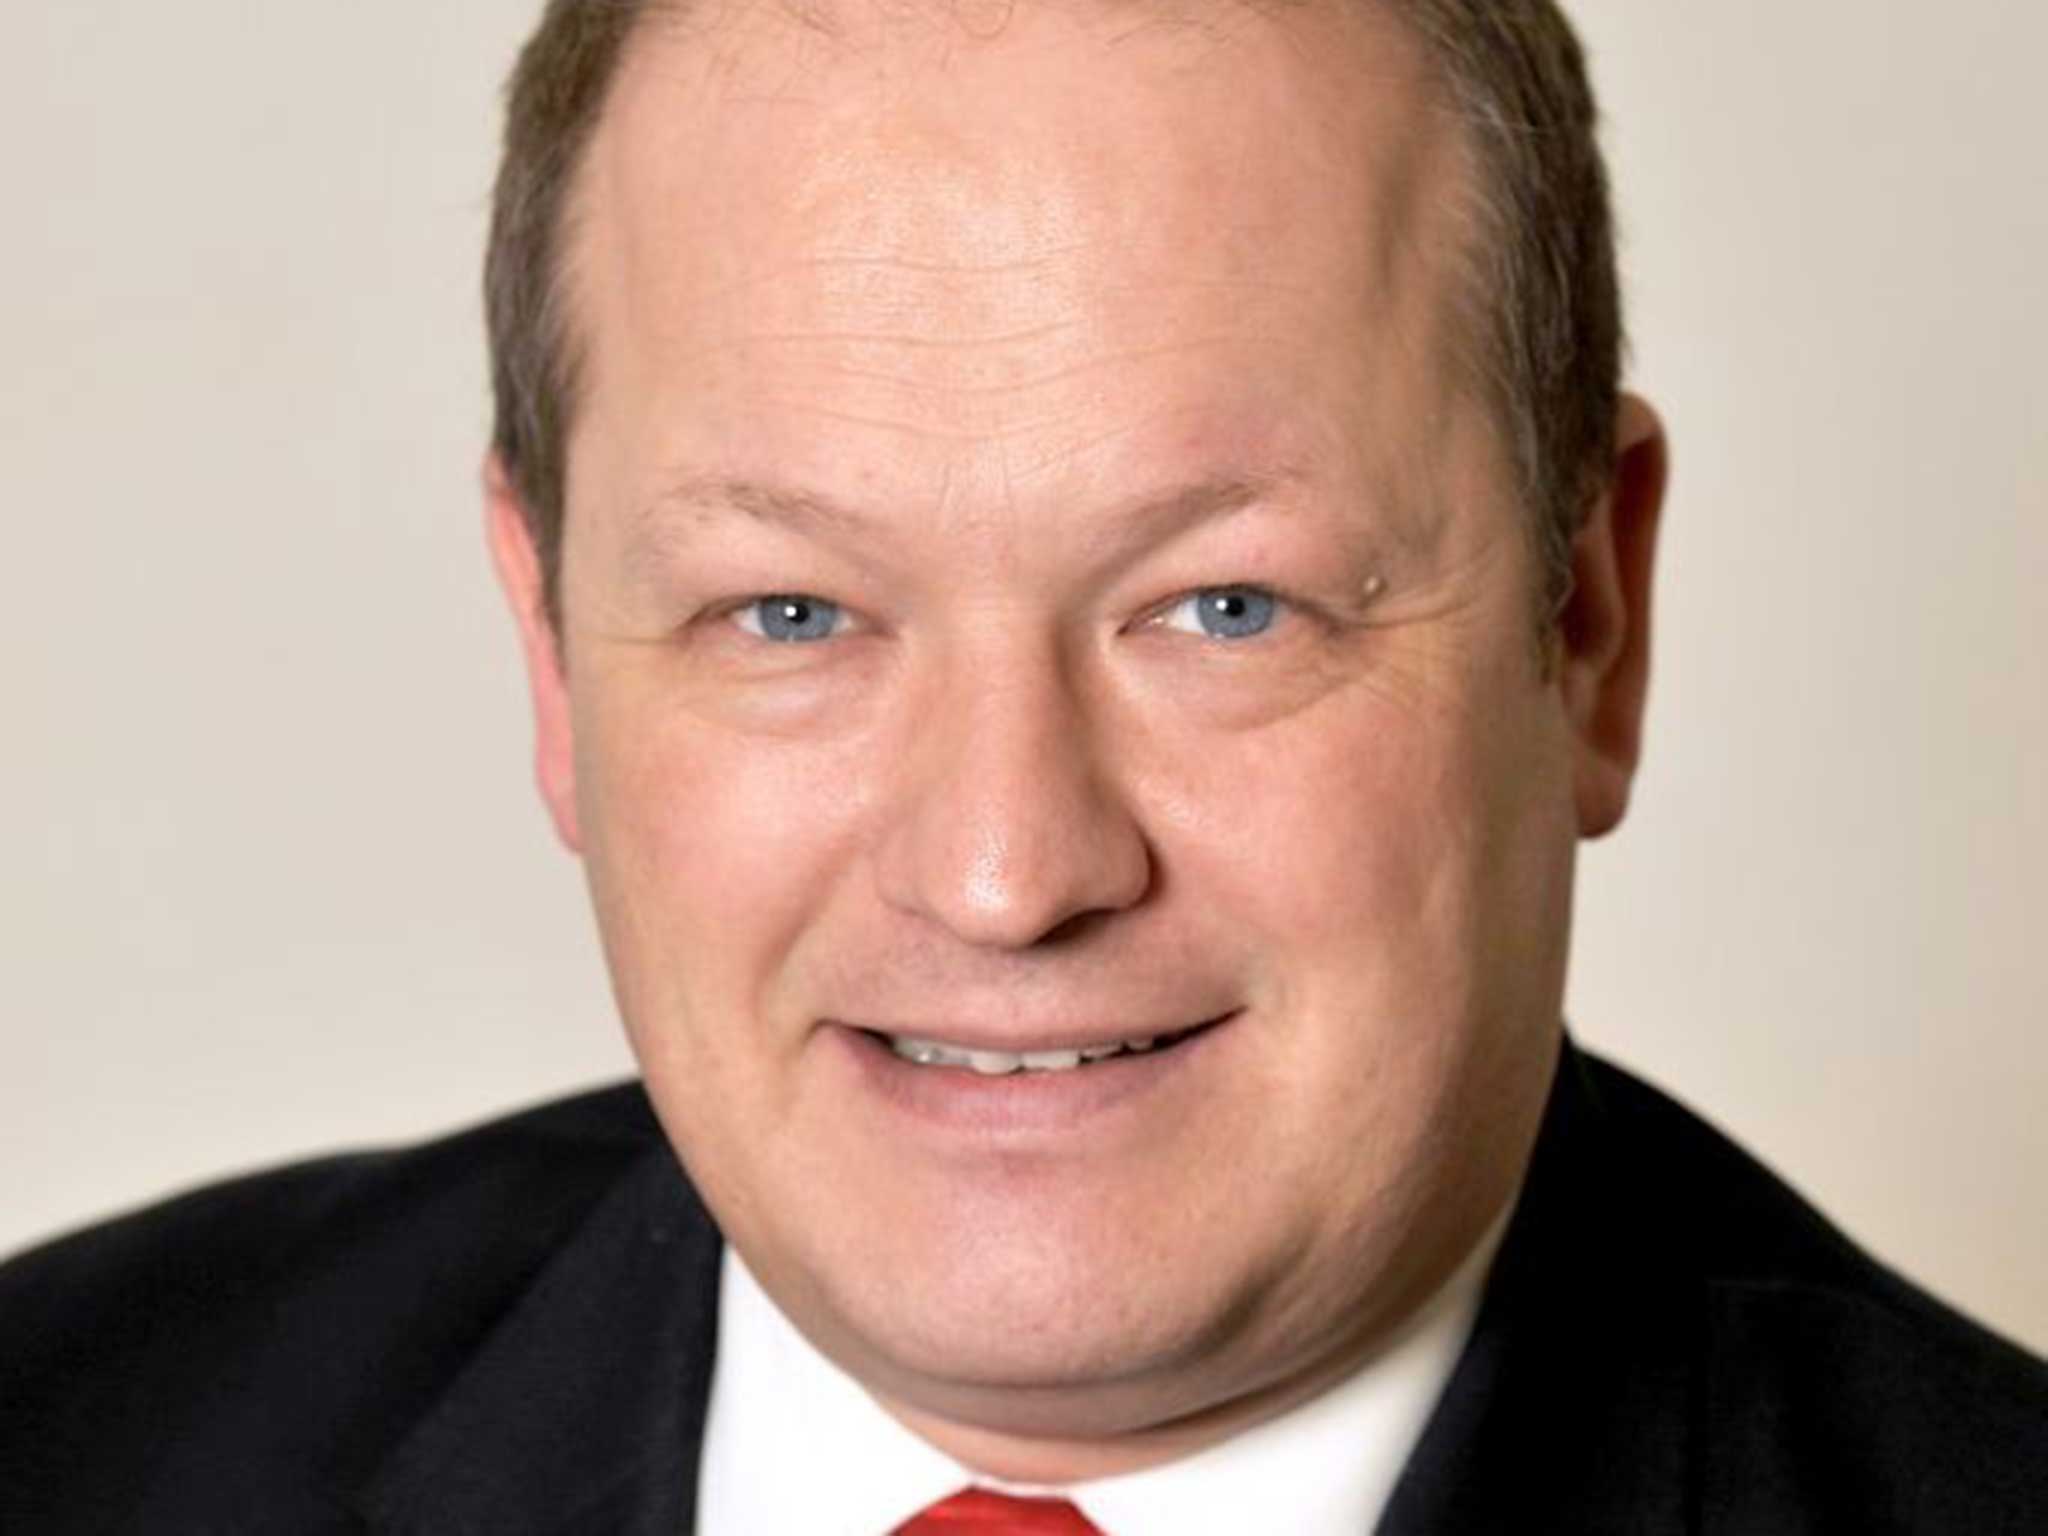 Danczuk has claimed he is a 'man of the world'